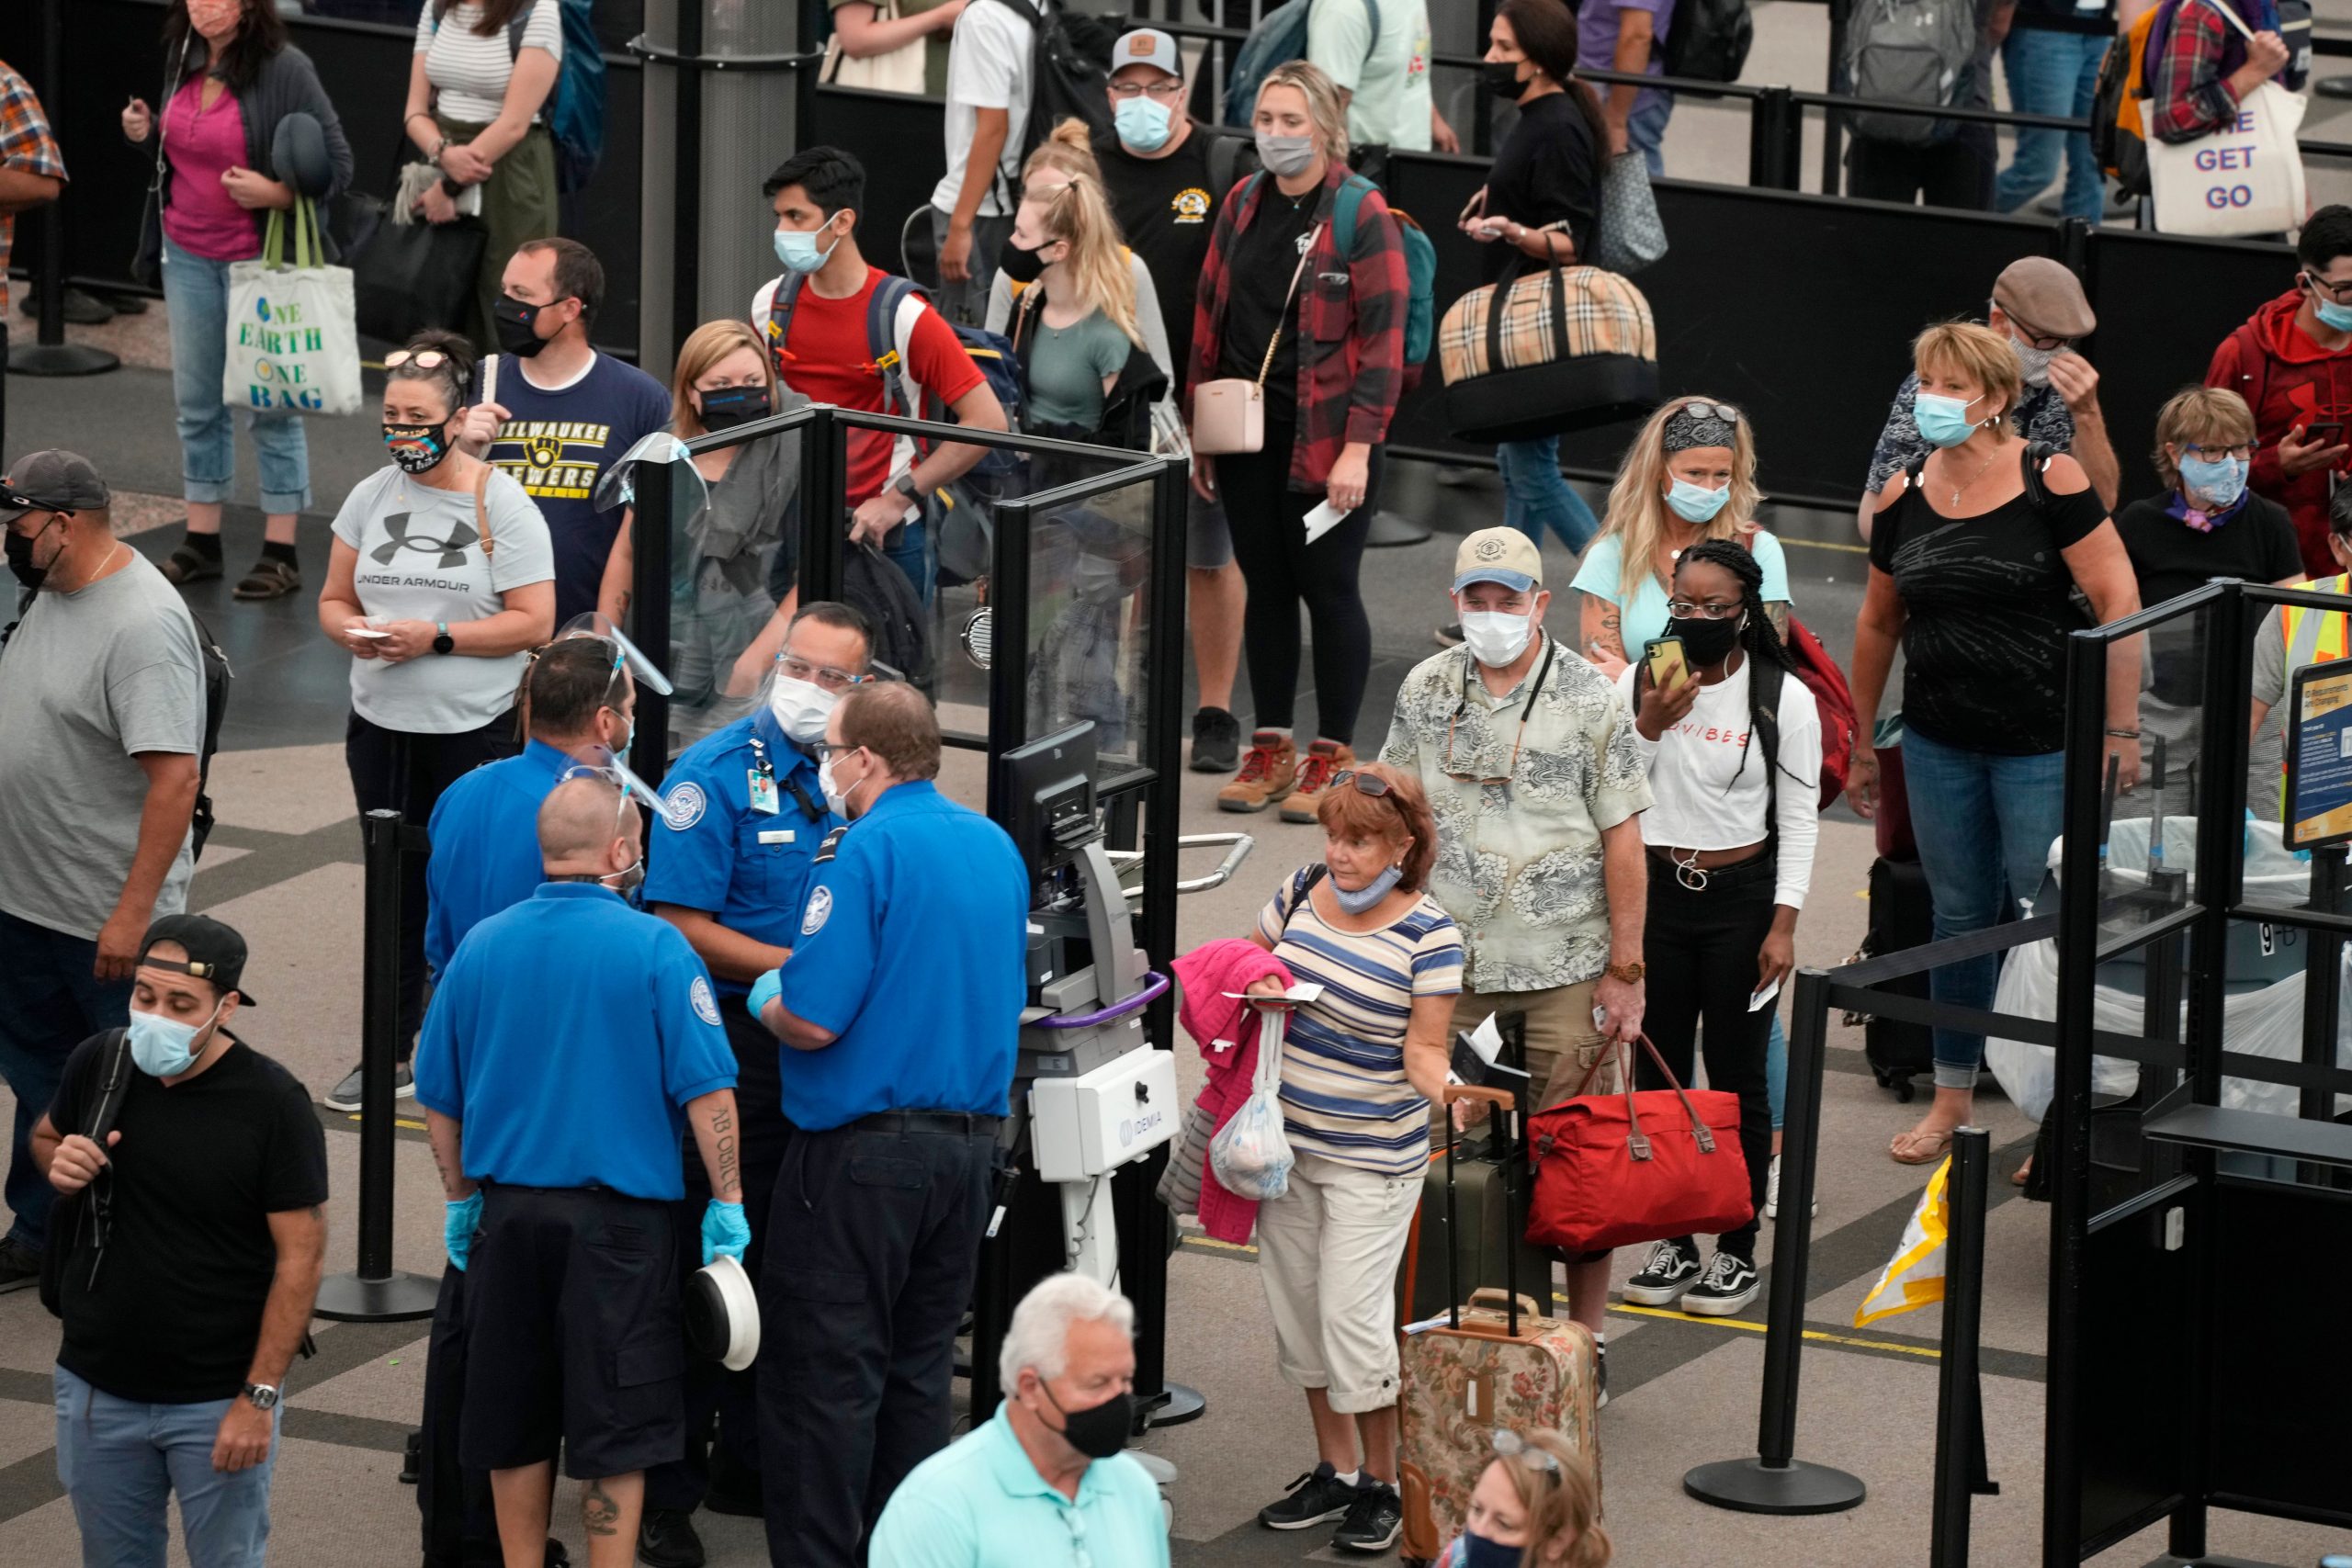 As security tightened, privacy took a hit in air travel after 9/11